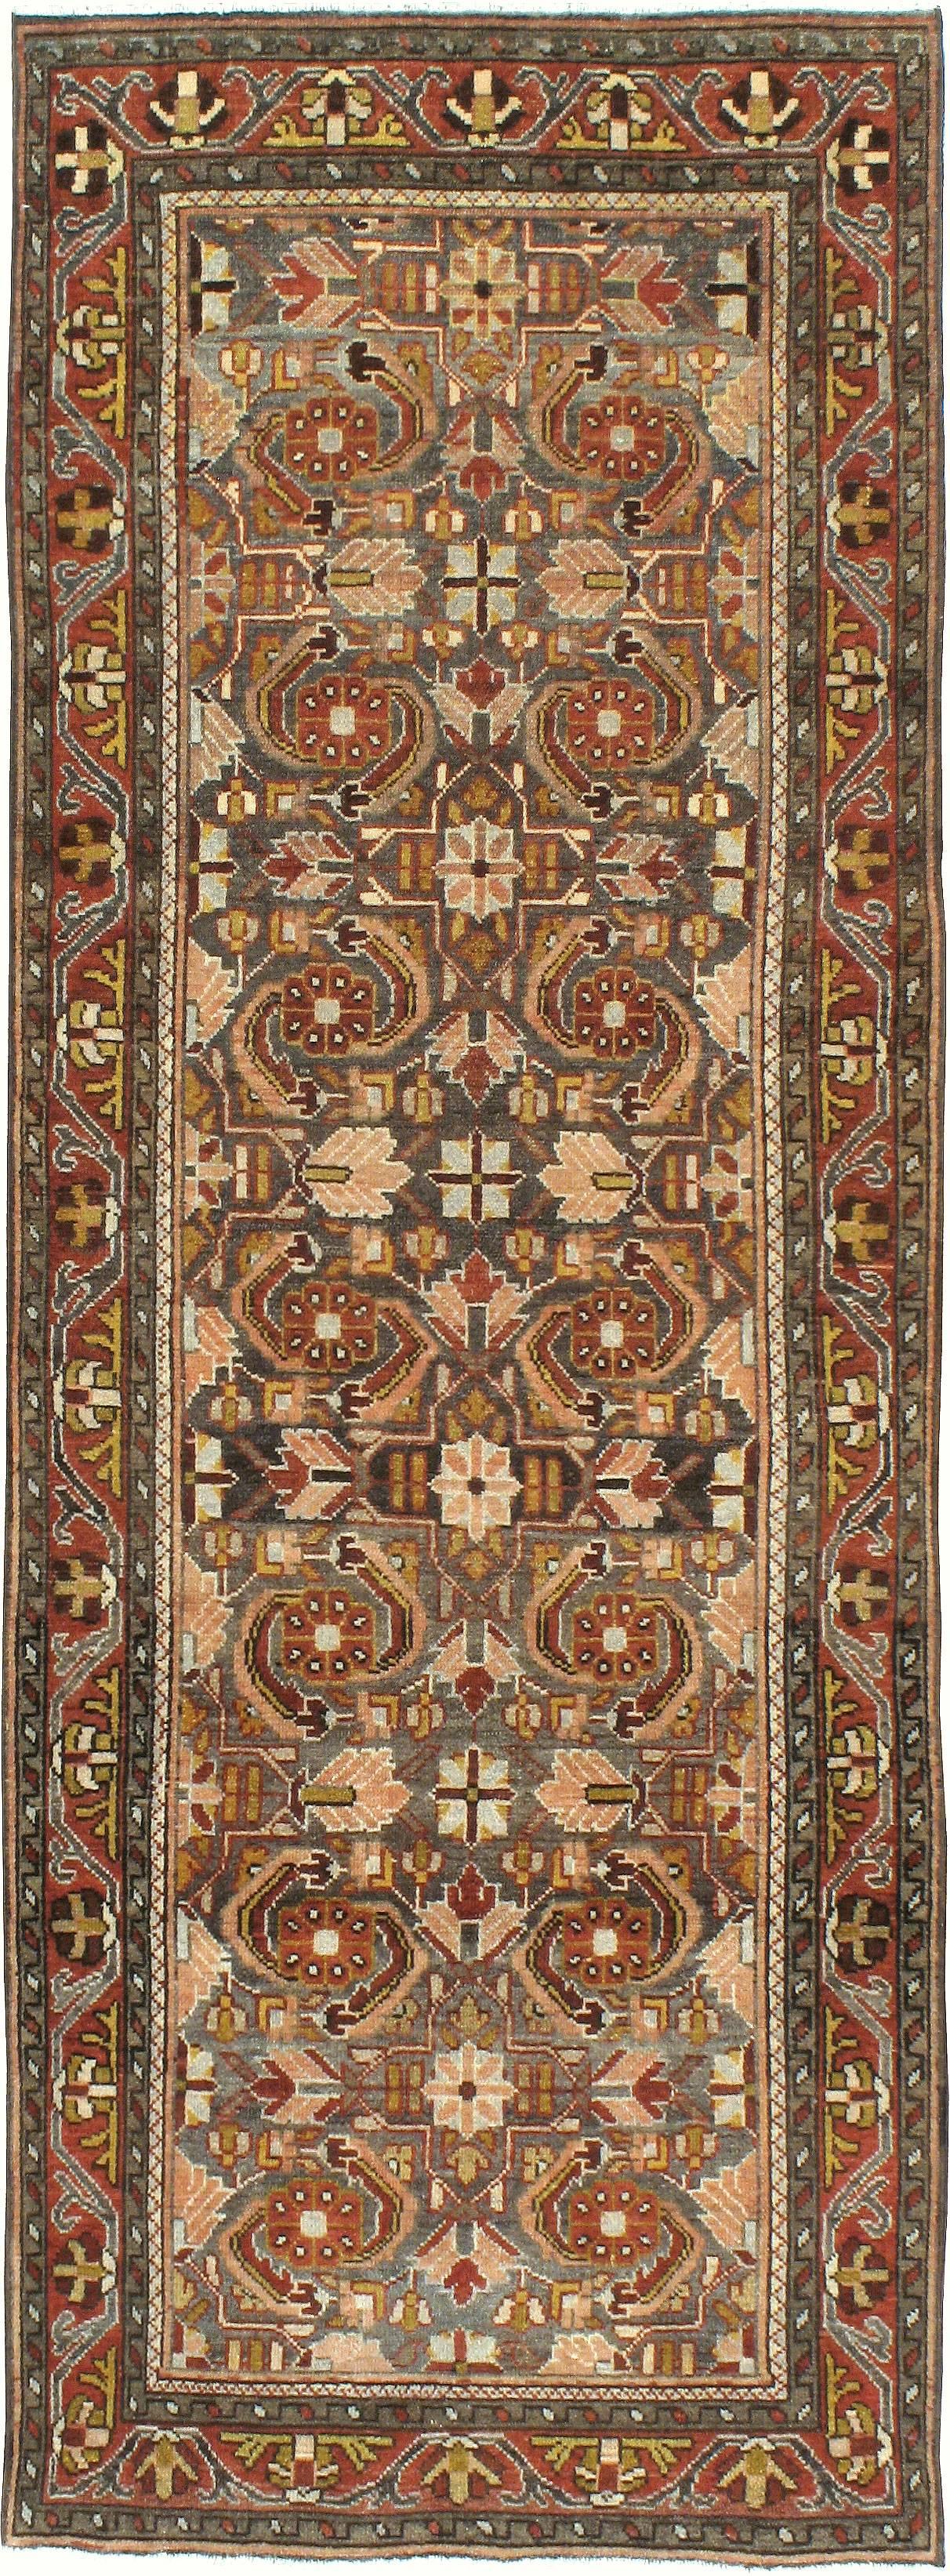 An antique Persian Malayer rug from the first quarter of the 20th century.